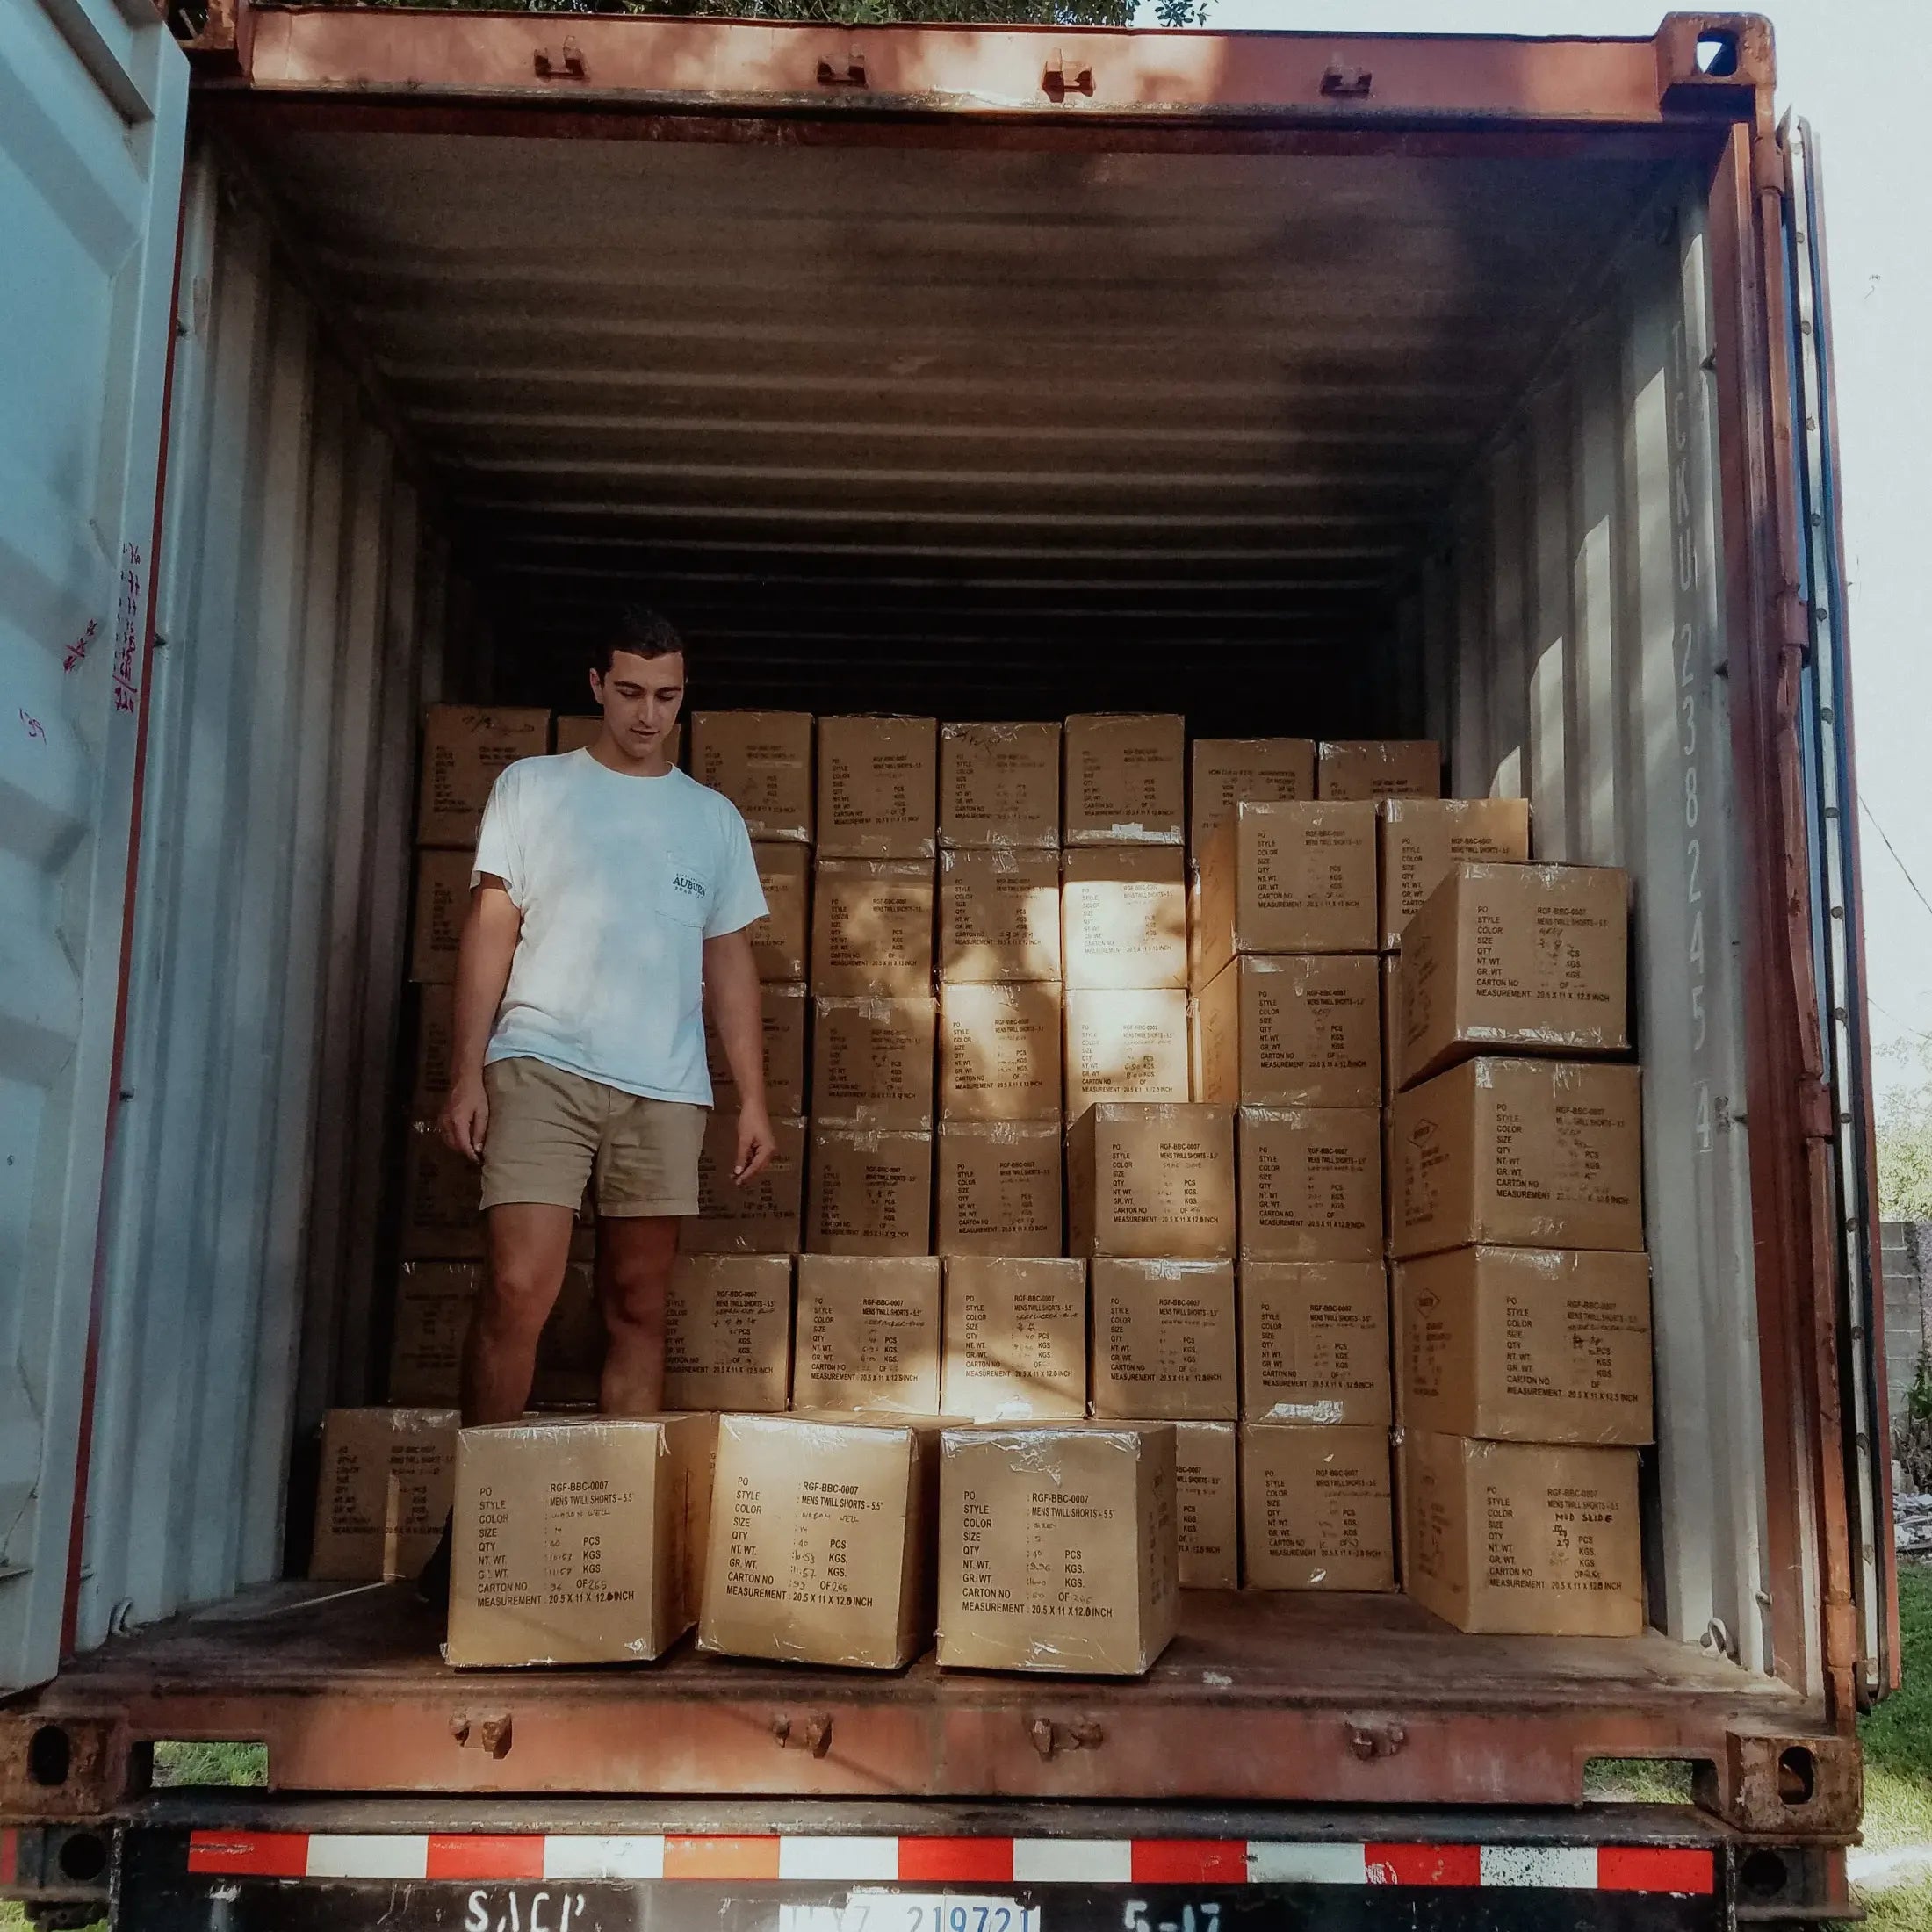 Robert Felder unloading boxes of clothes inside container truck